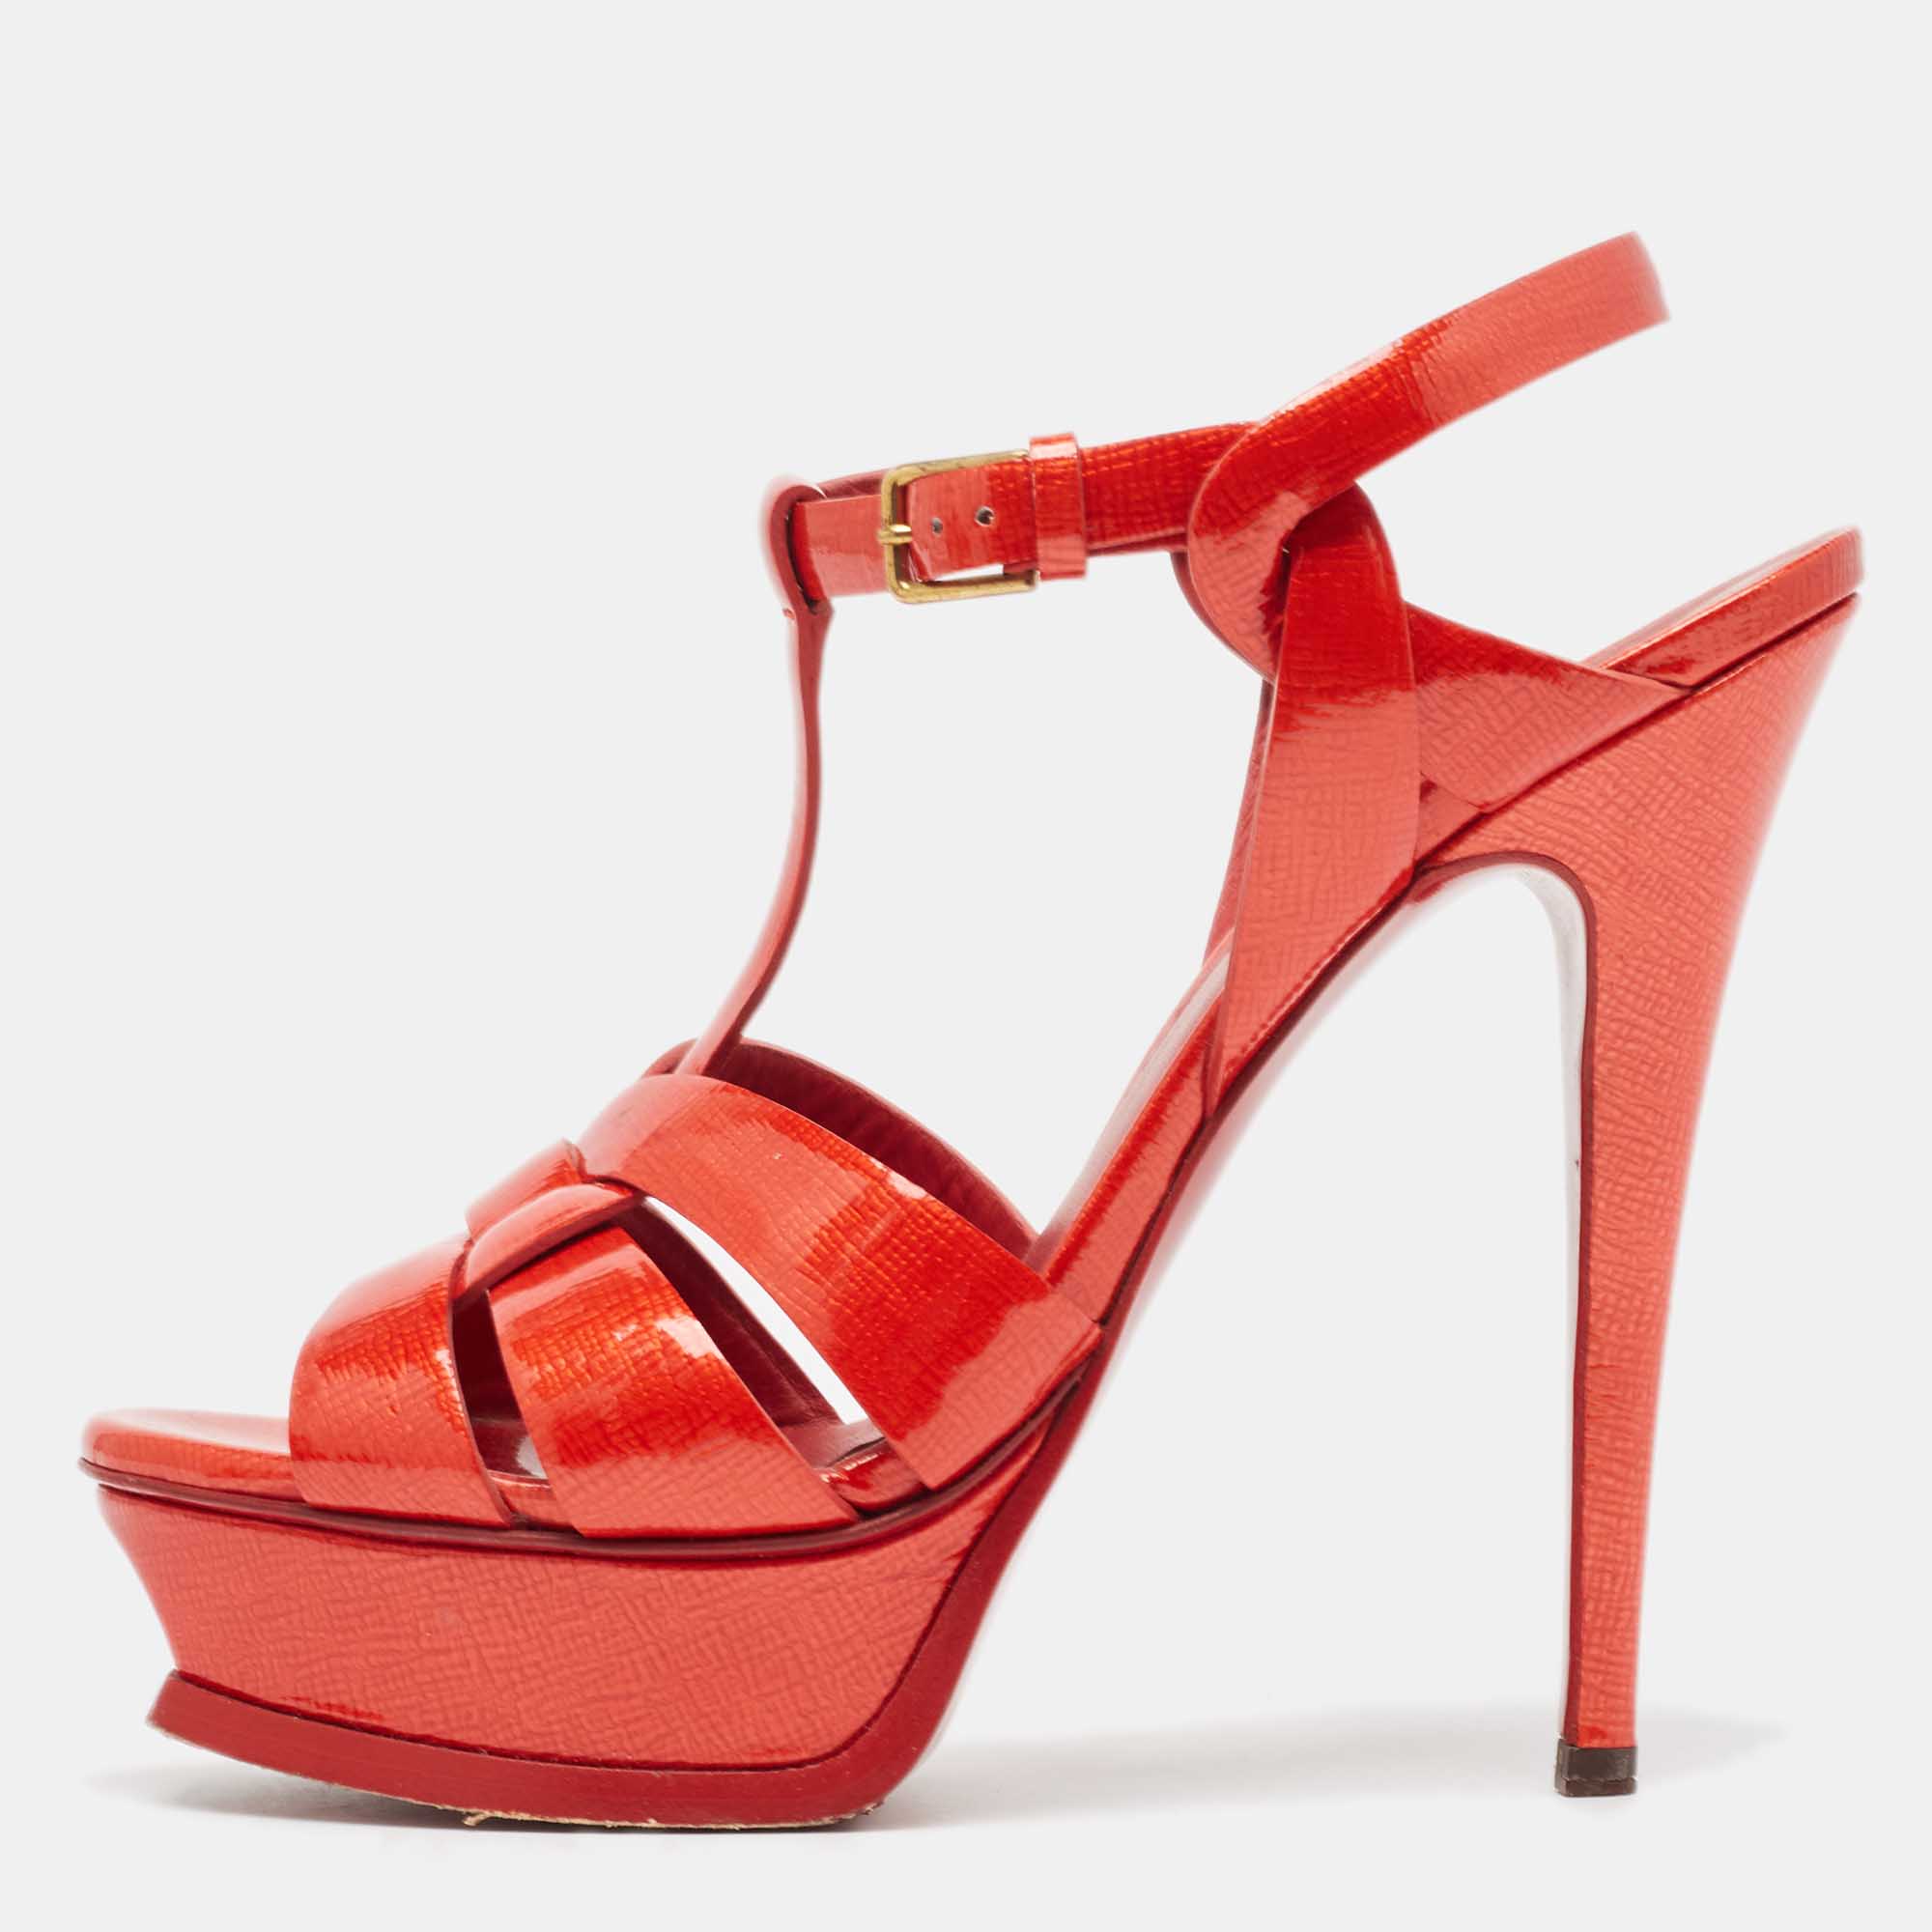 Yves saint laurent red patent leather tribute sandals size 37.5